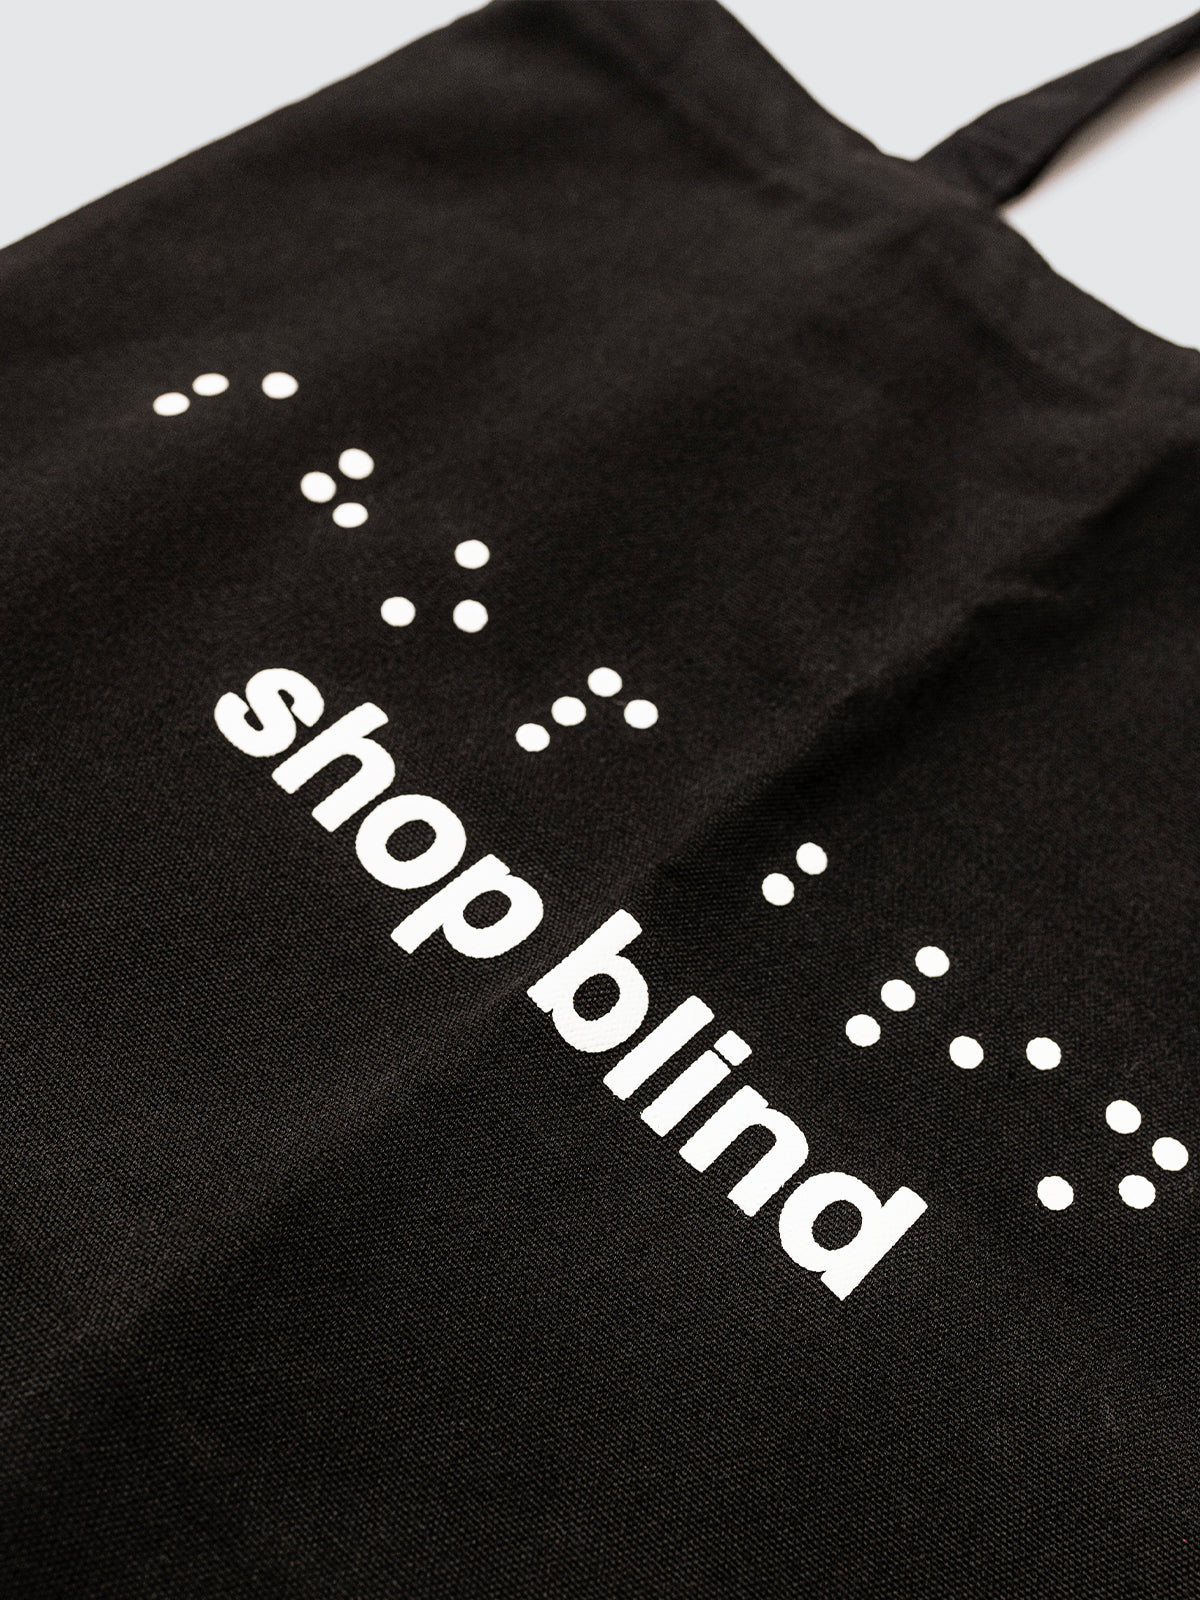 Two Blind Brothers - Gift Shop Blind Tote Bag all